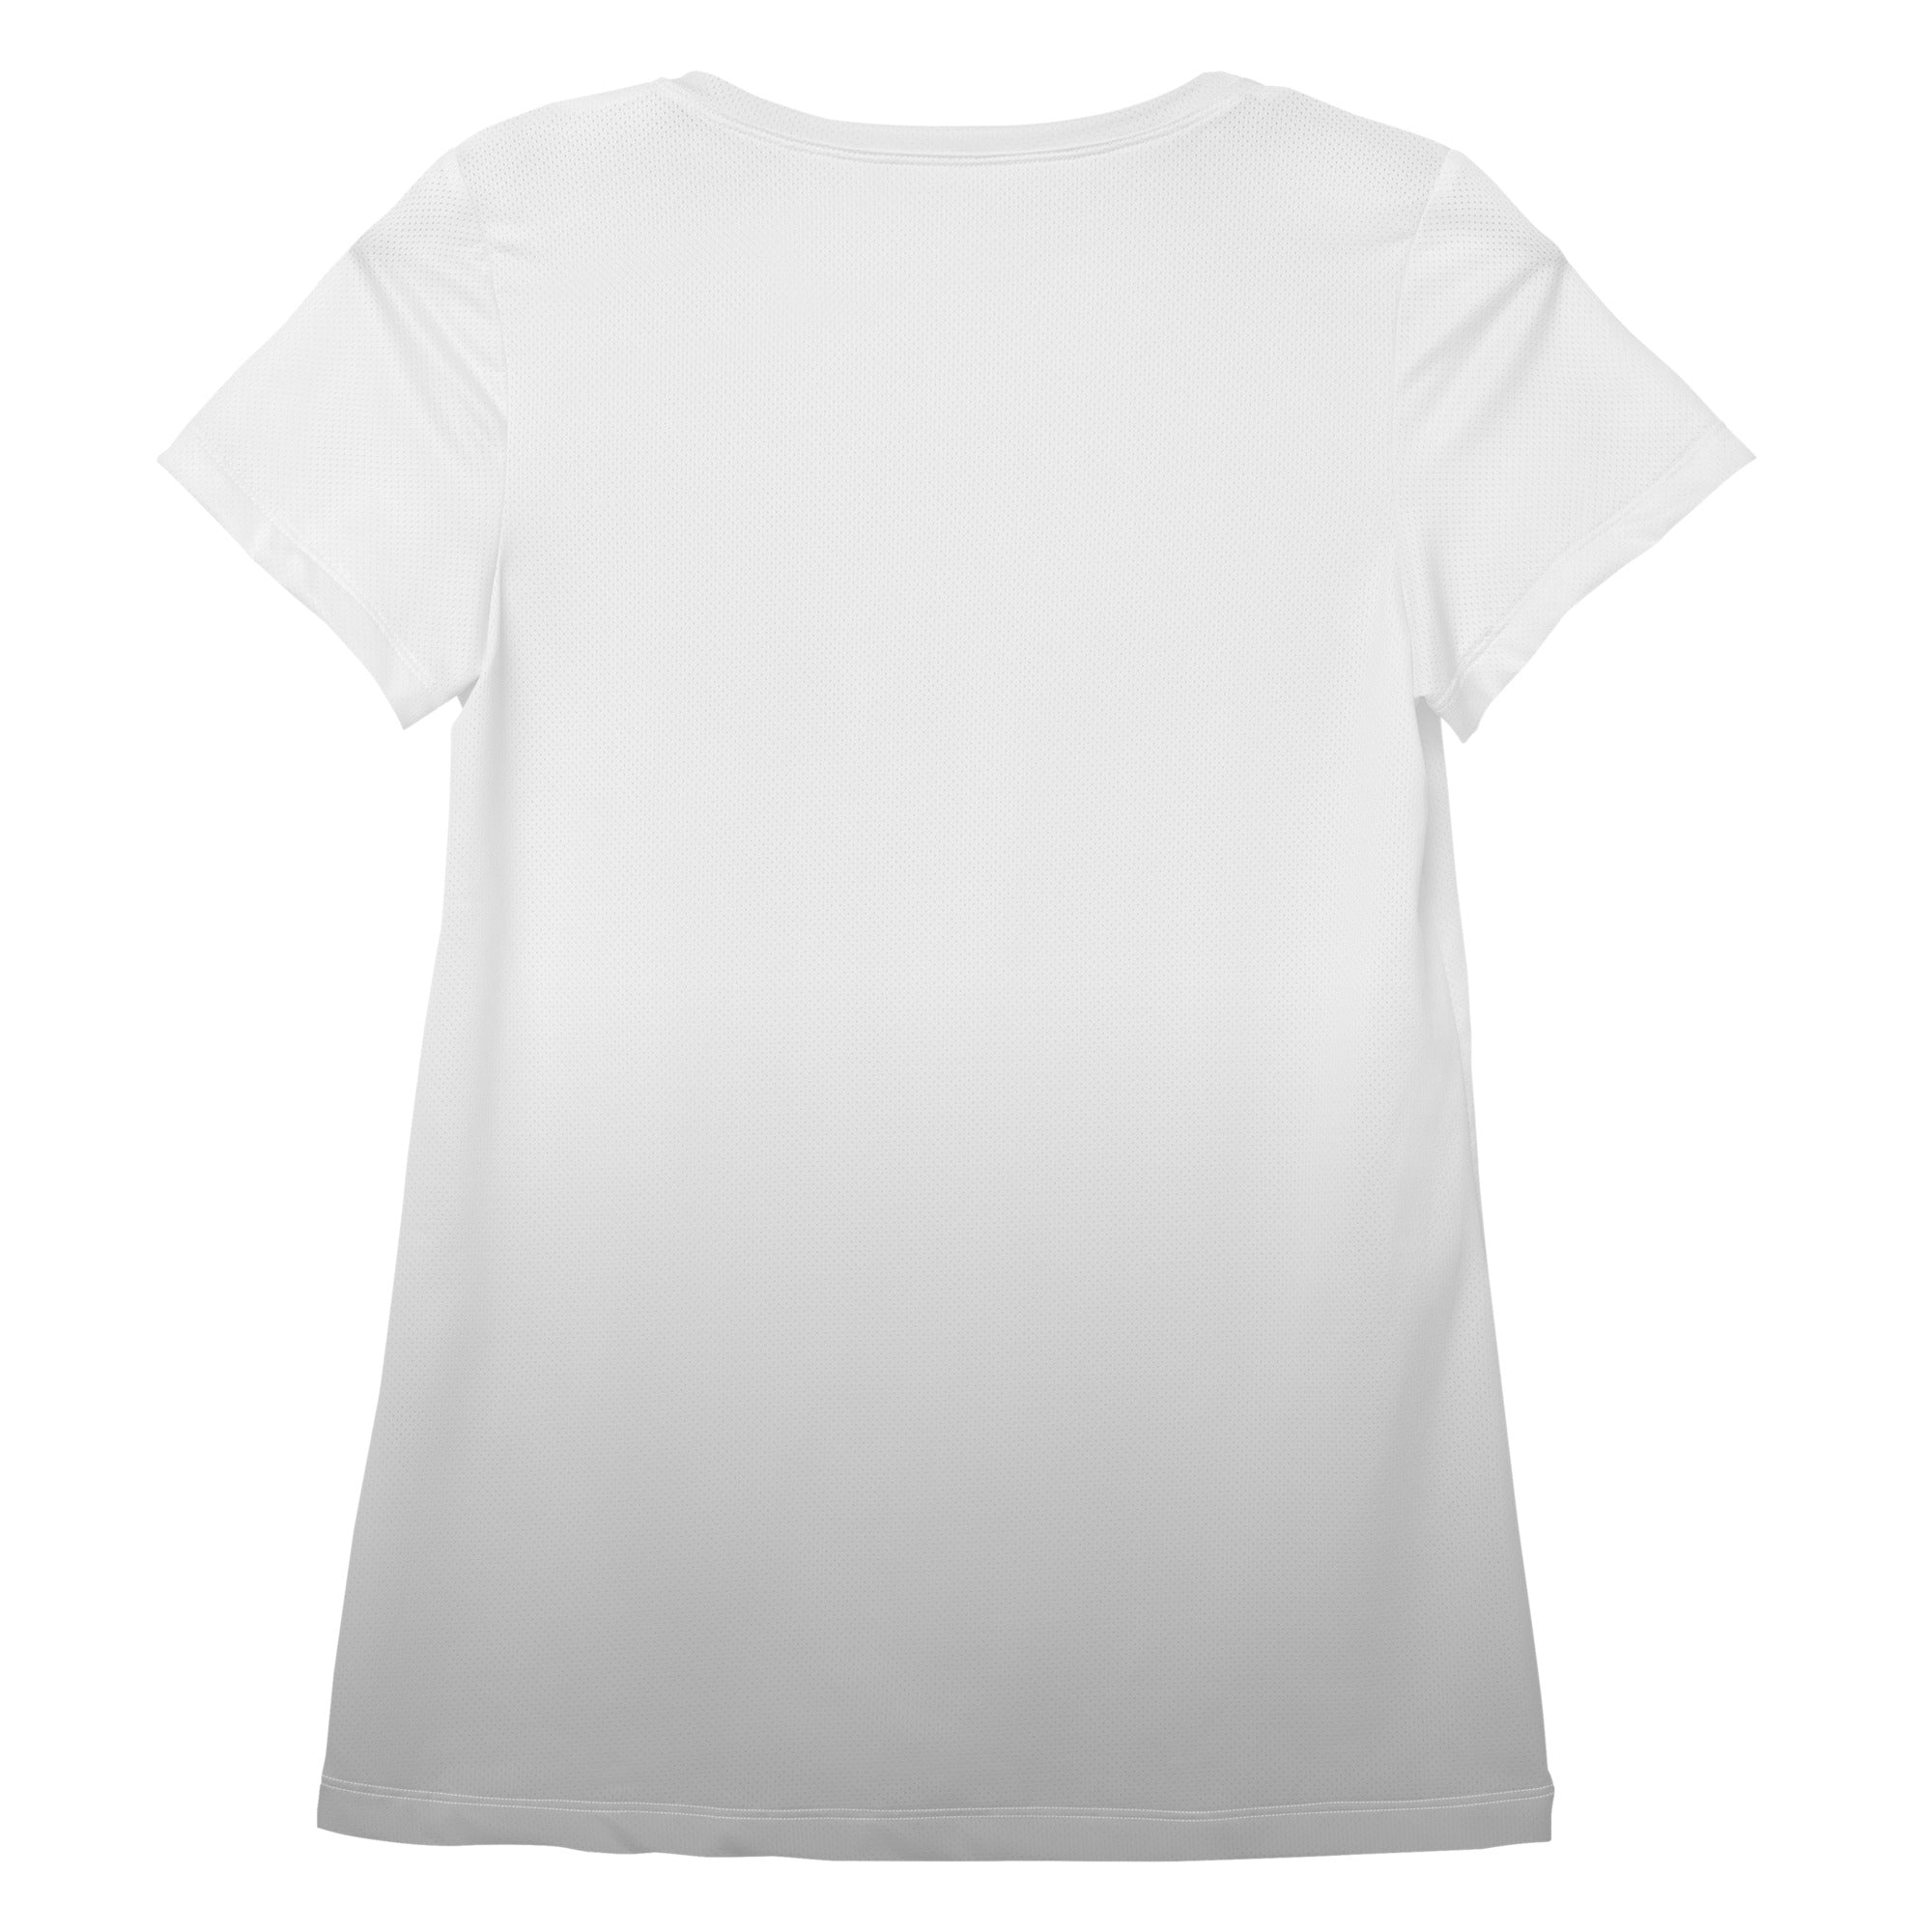 Spike Up All-Over Print Women's Athletic T-shirt